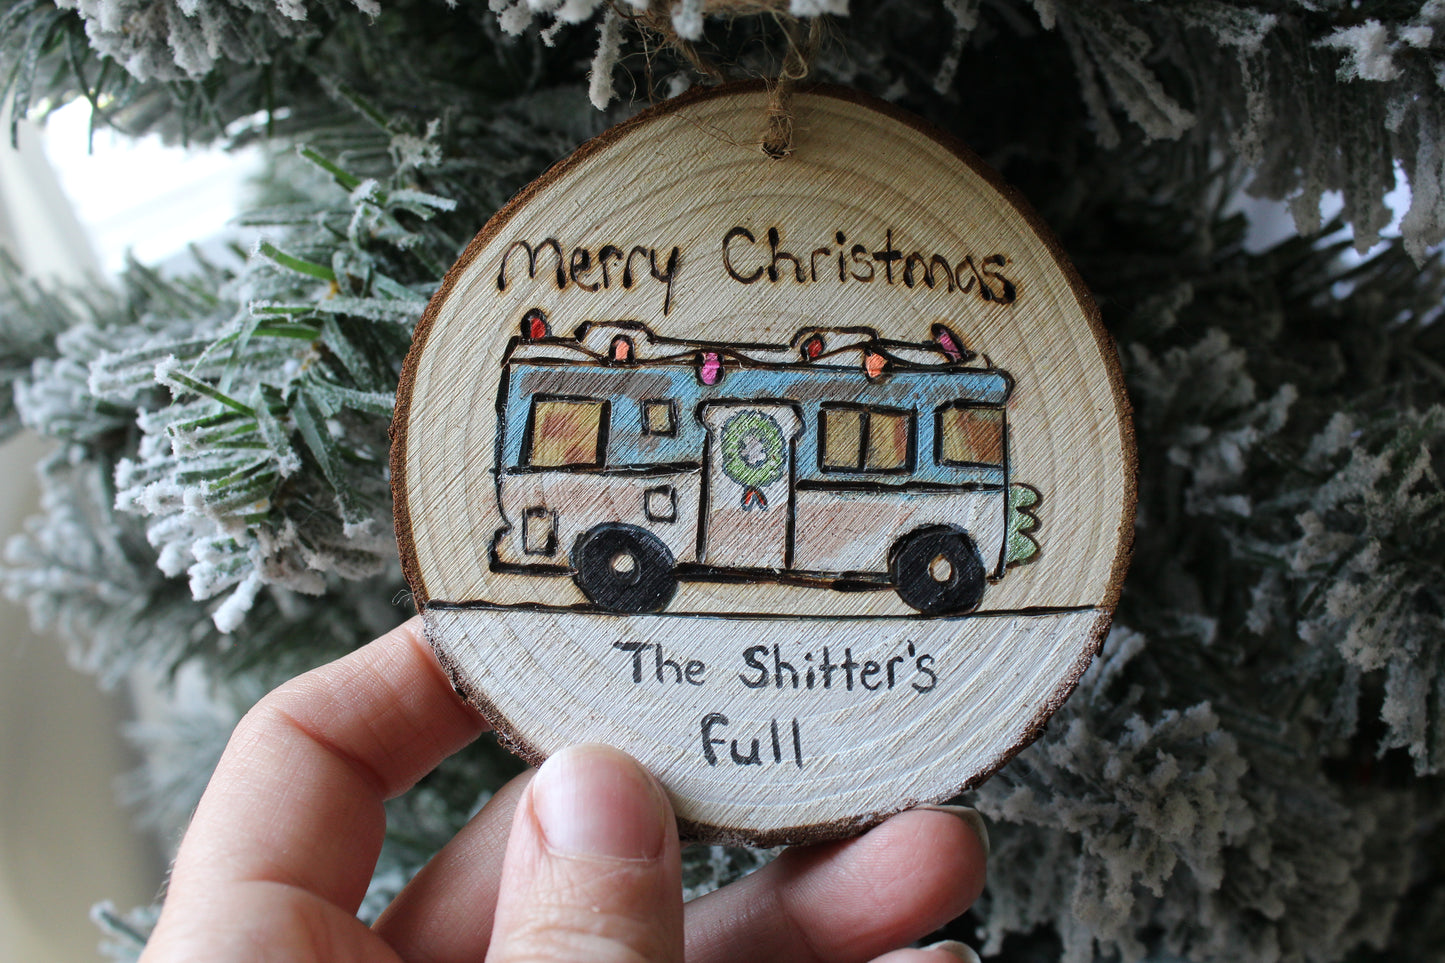 National Lampoons Christmas Vacation Shitter's Full RV ornament cousin Eddie